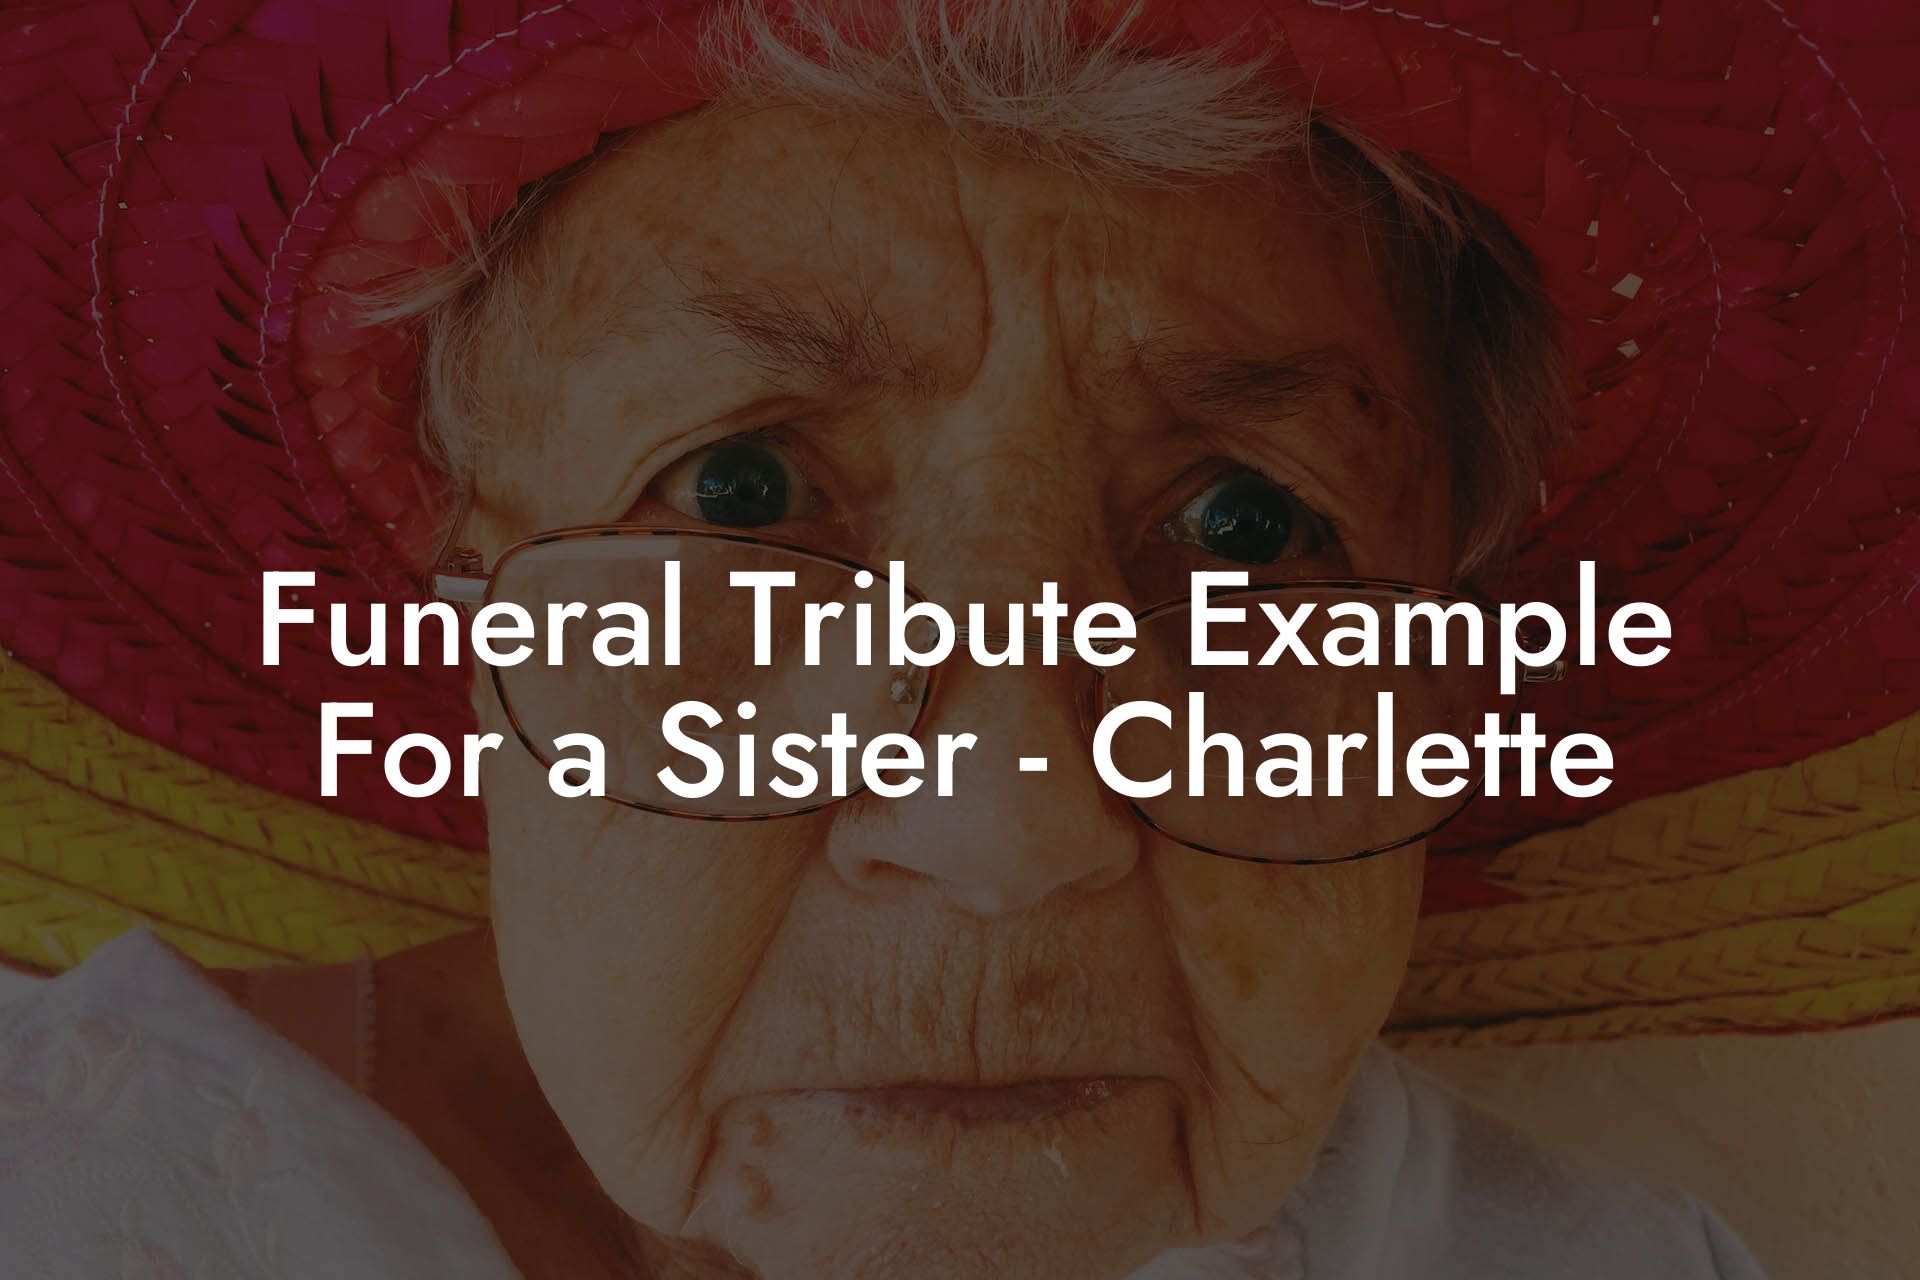 Funeral Tribute Example For a Sister - Charlette - Eulogy Assistant